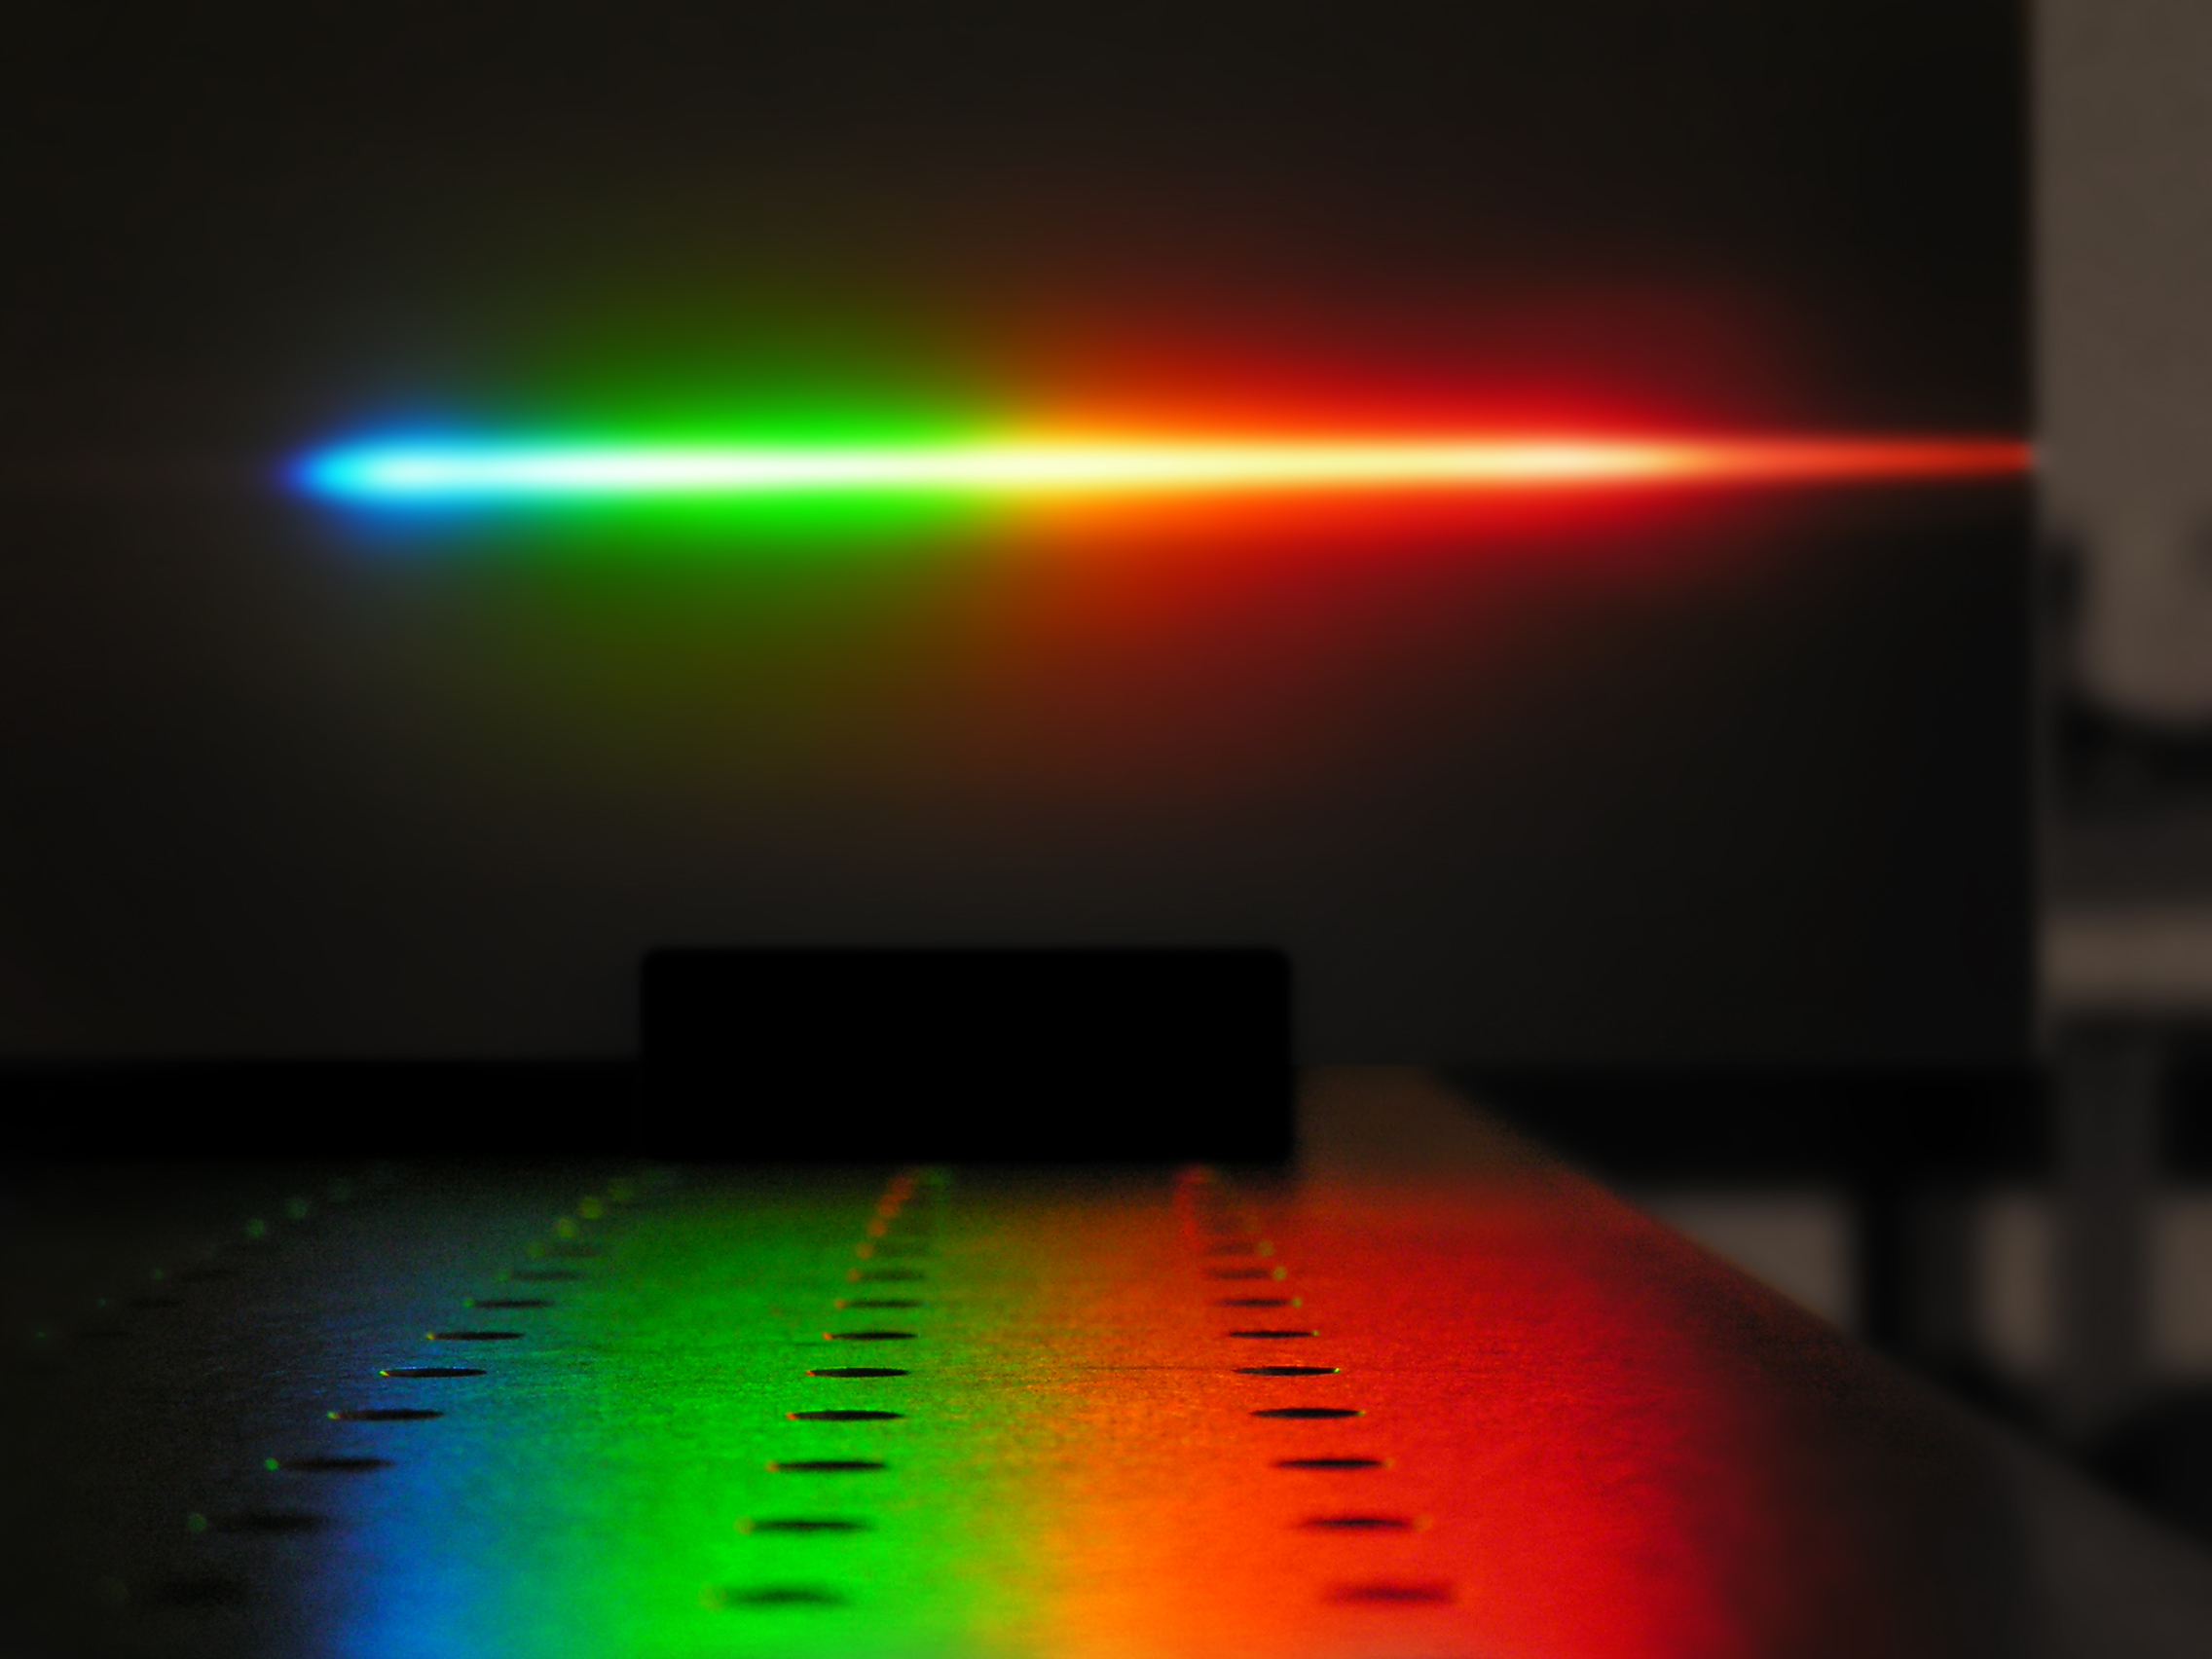 White-light lasers emit many spectral components and can be focused like other laser types. The white-light laser developed at Fraunhofer AZOM enables intensities on the sample surface which conventional white-light sources cannot achieve.